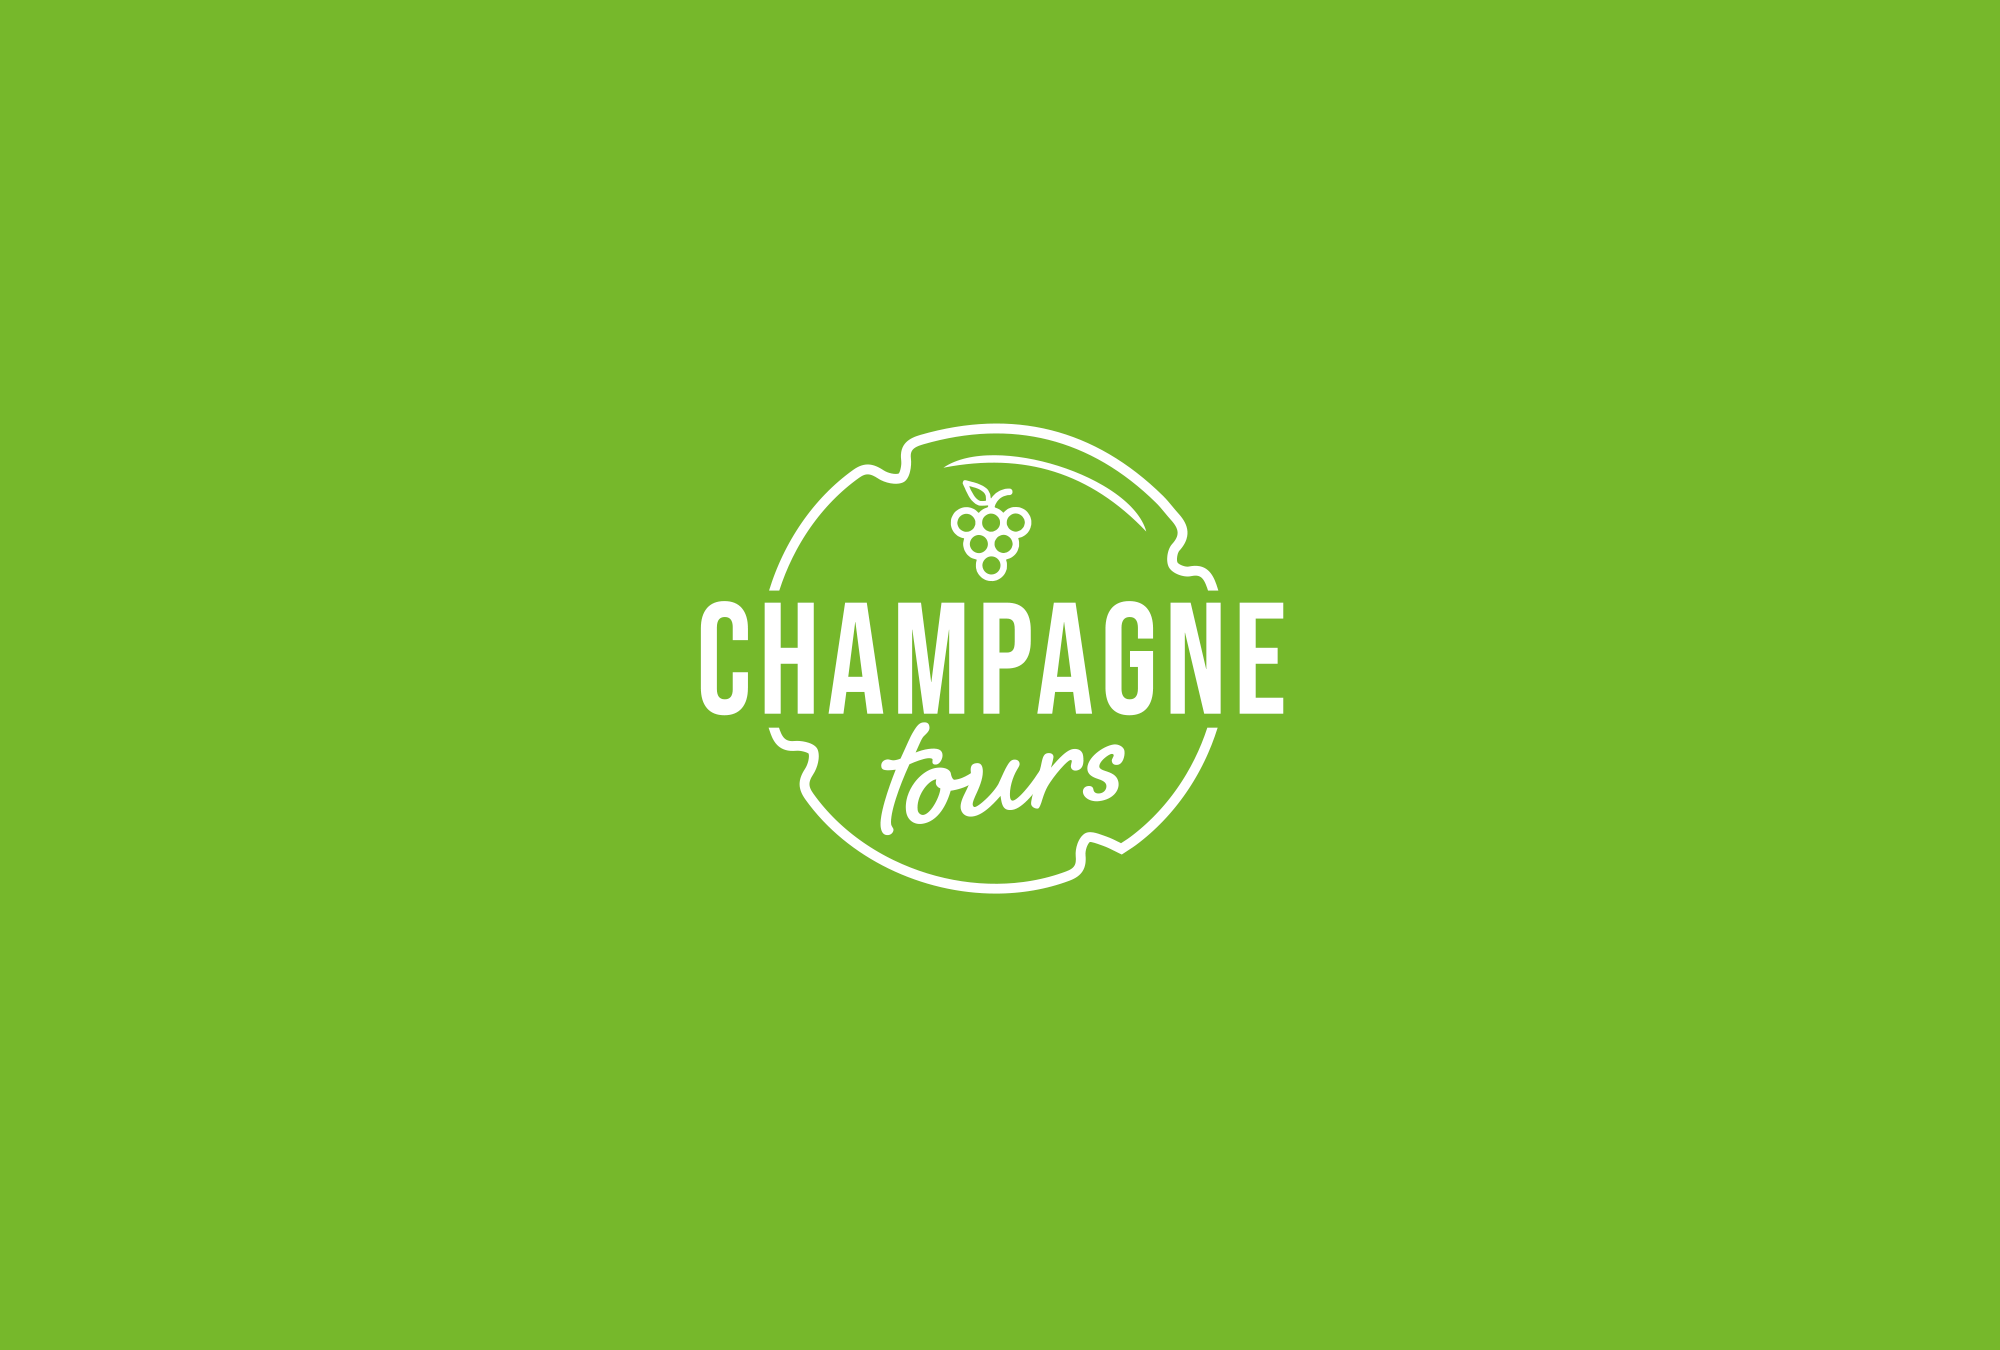 CHAMPAGNE TOURS